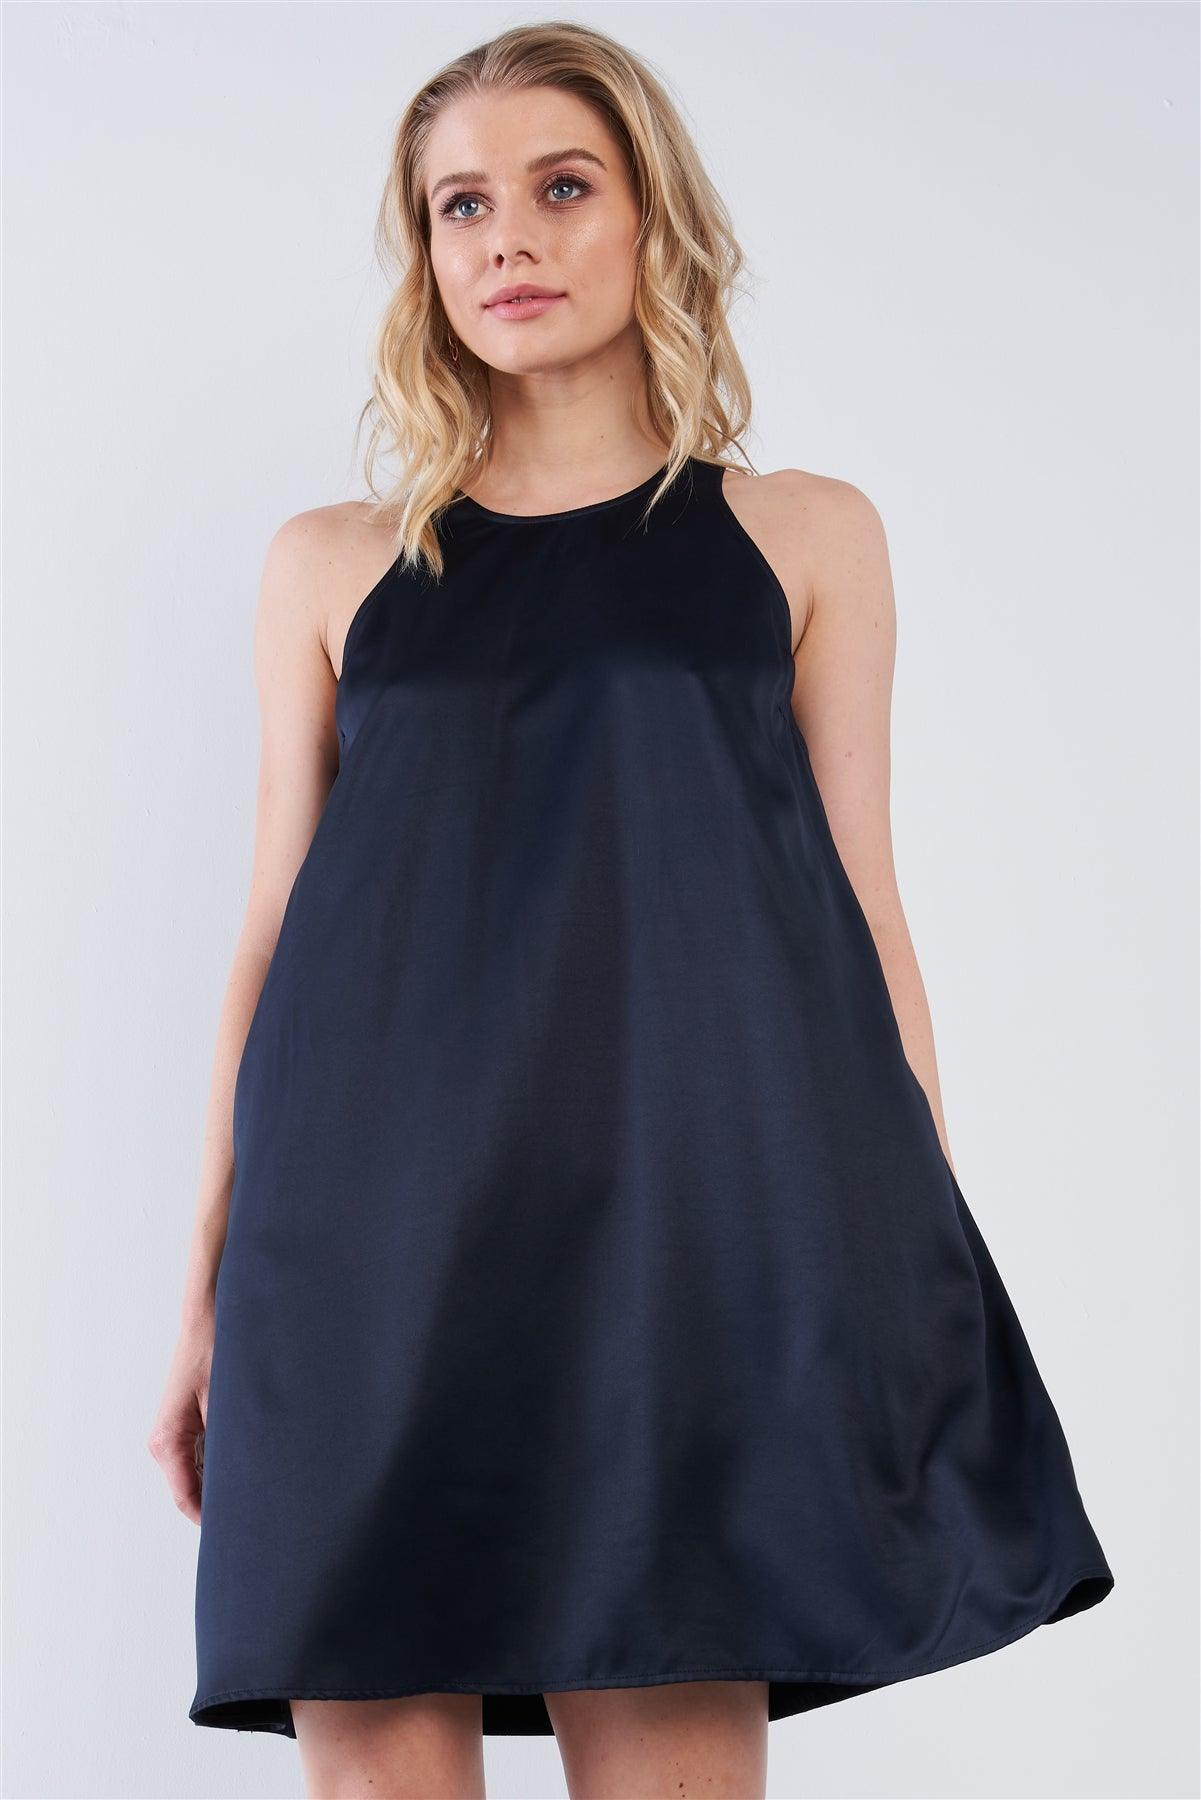 Solid Navy Blue Satin Front Cloth Back Sleeveless Loose Fit Mini Dress